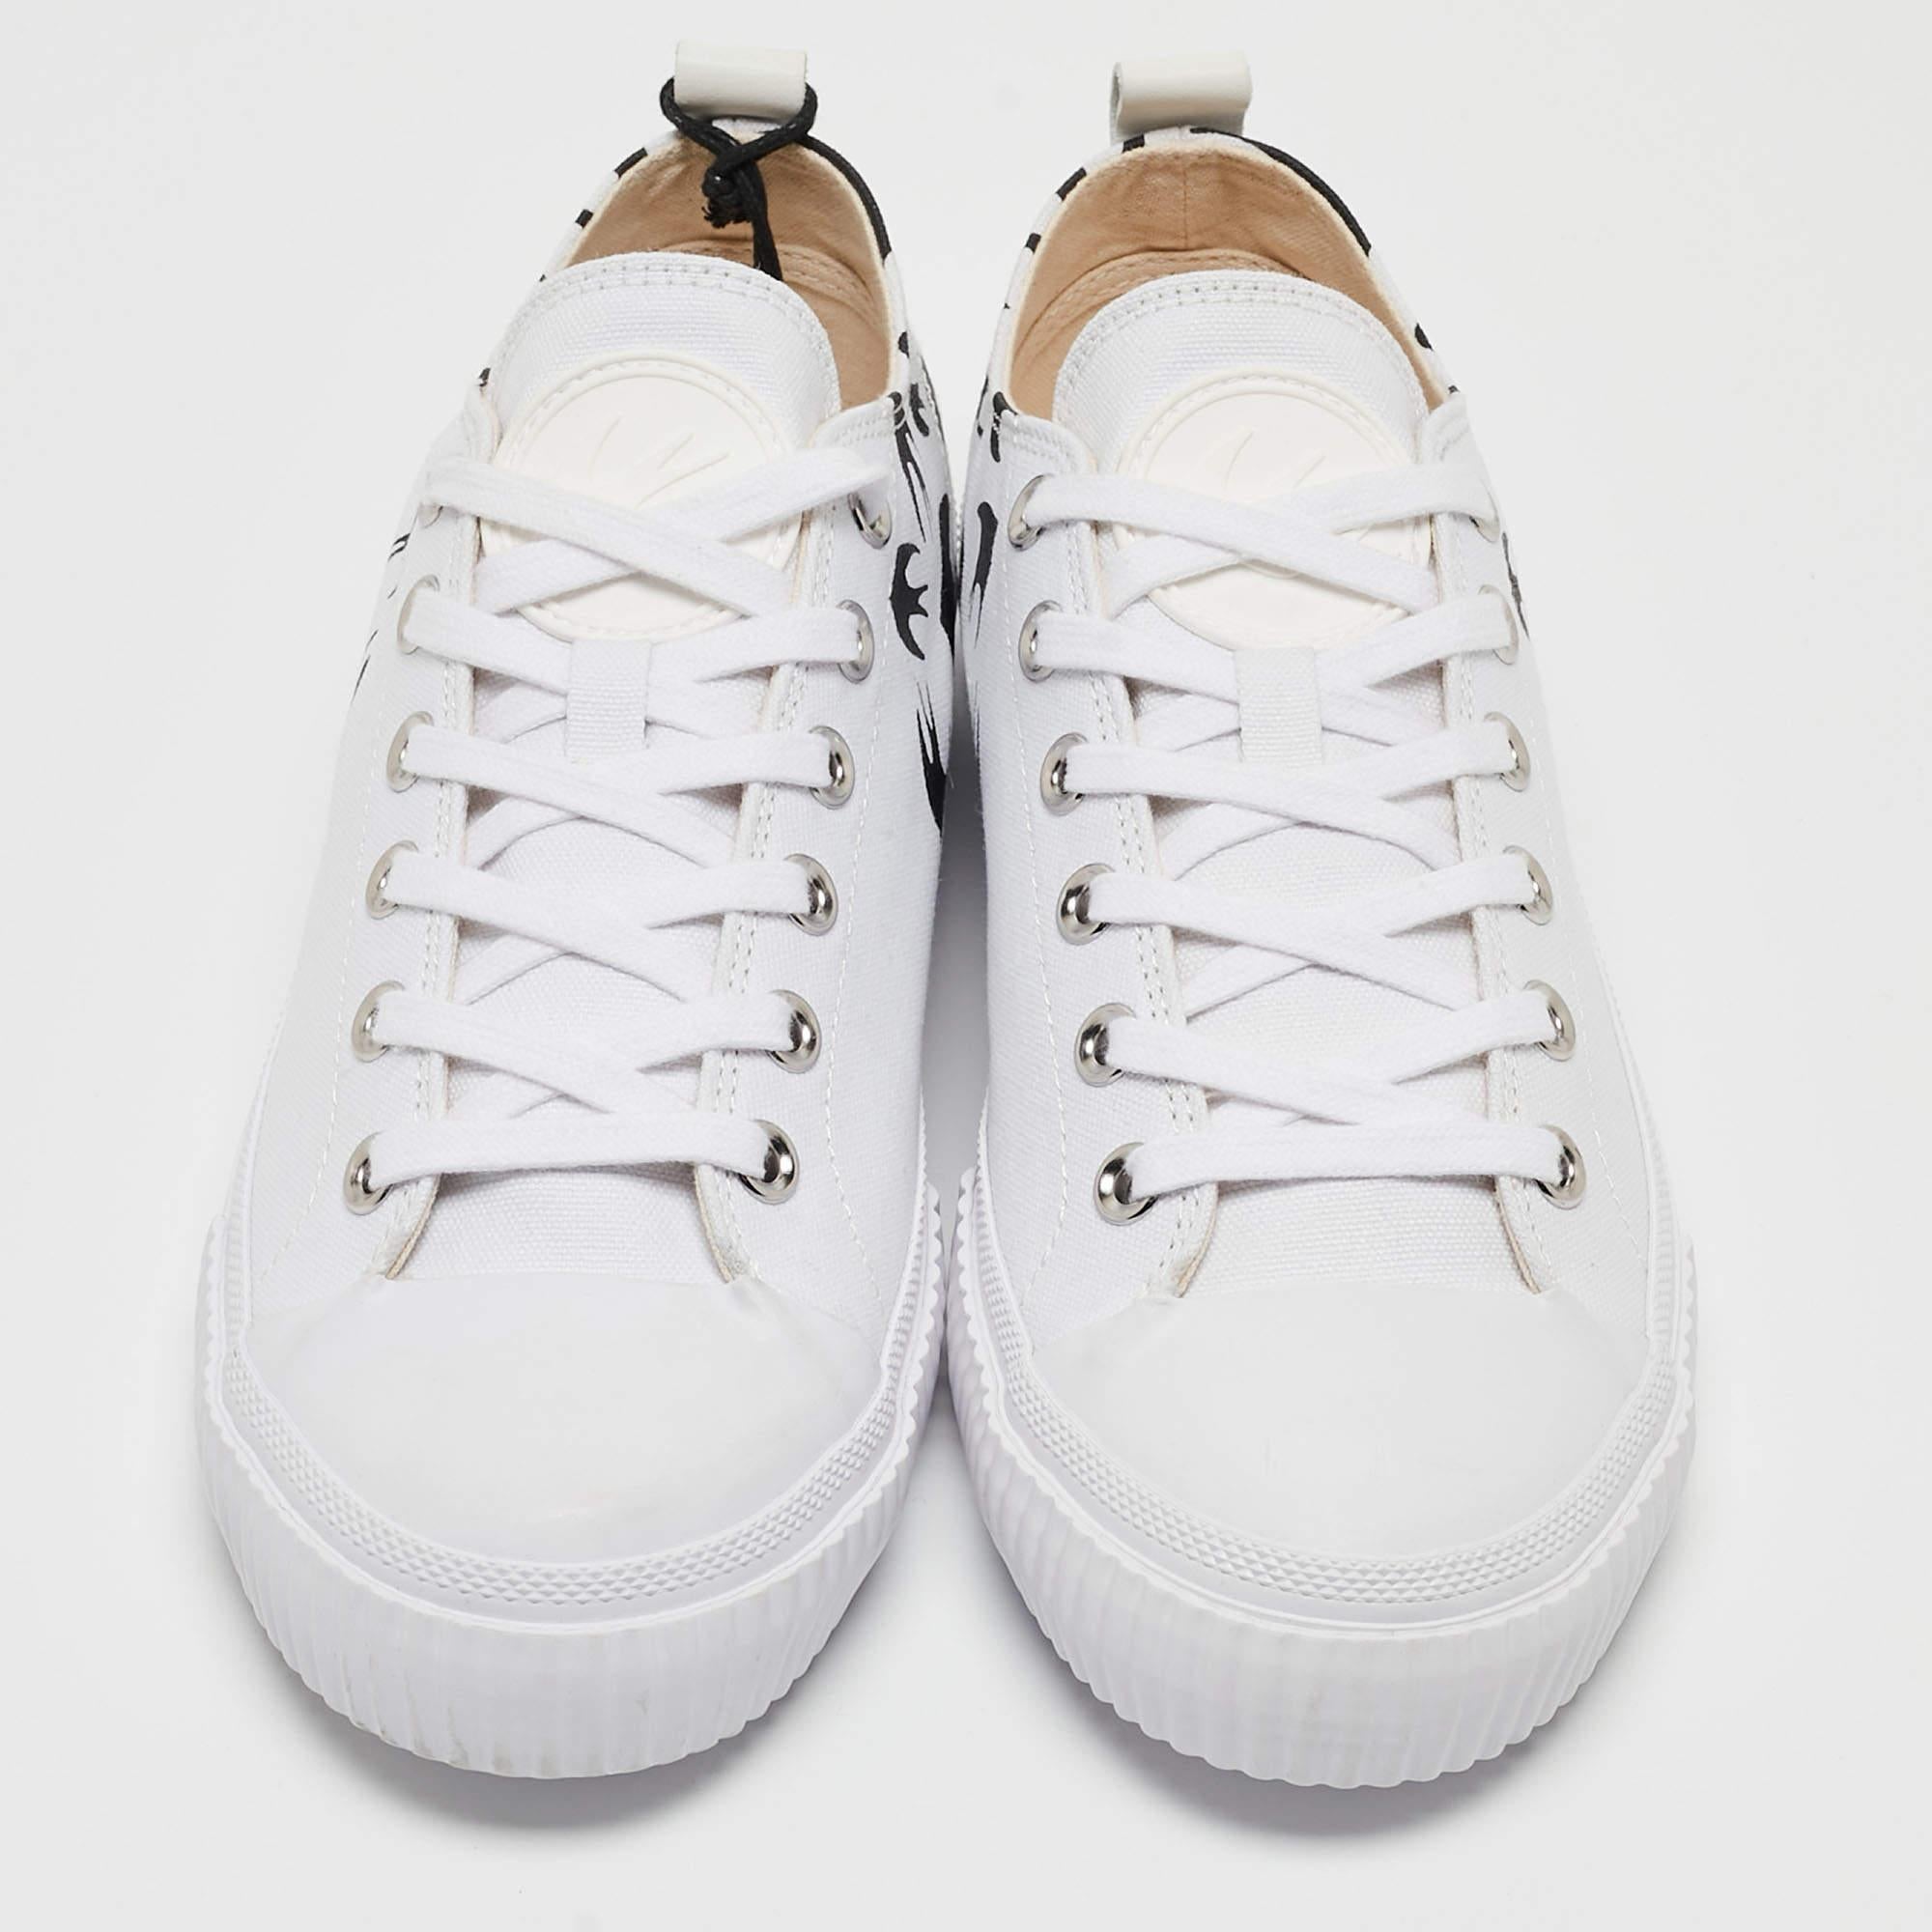 Women's McQ by Alexander McQueen White/Black Canvas Shallow Swarm Sneakers Size 40